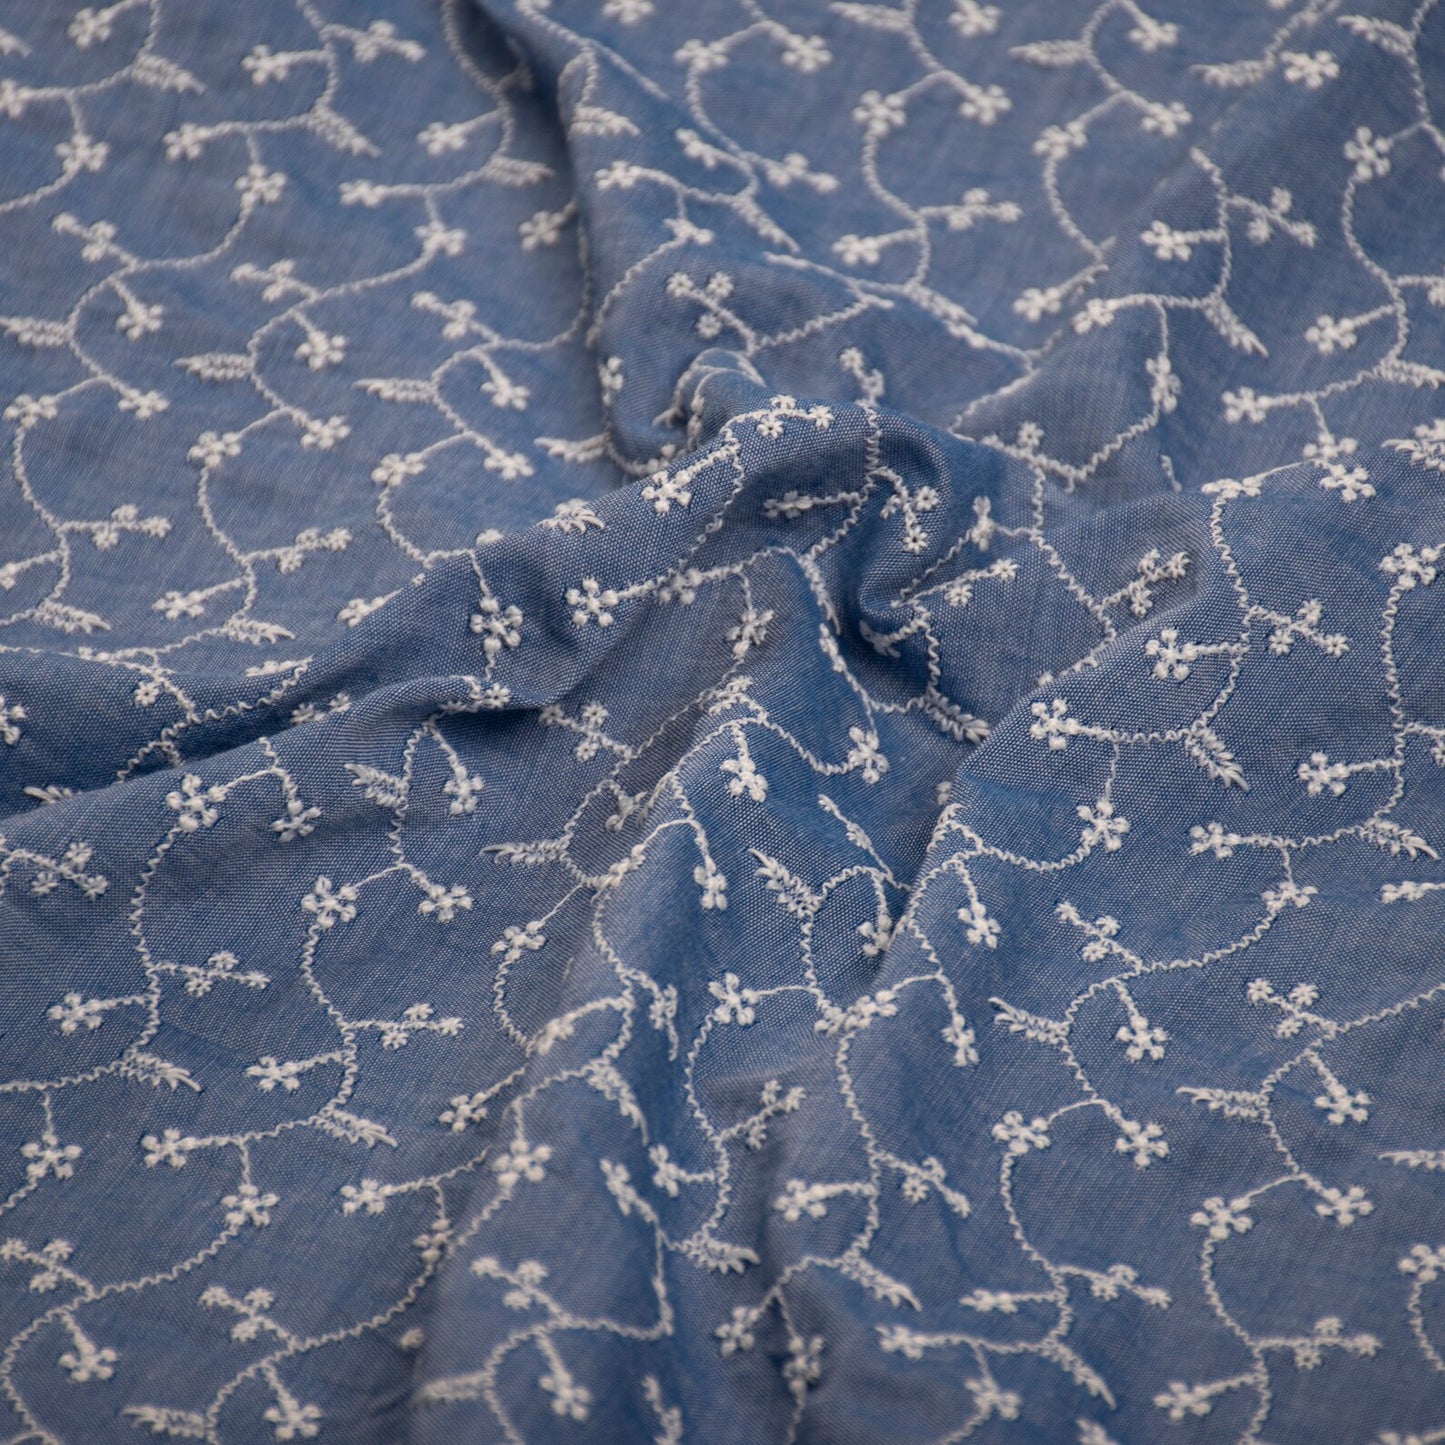 Blue and White Schiffli Embroidery Cotton Fabric